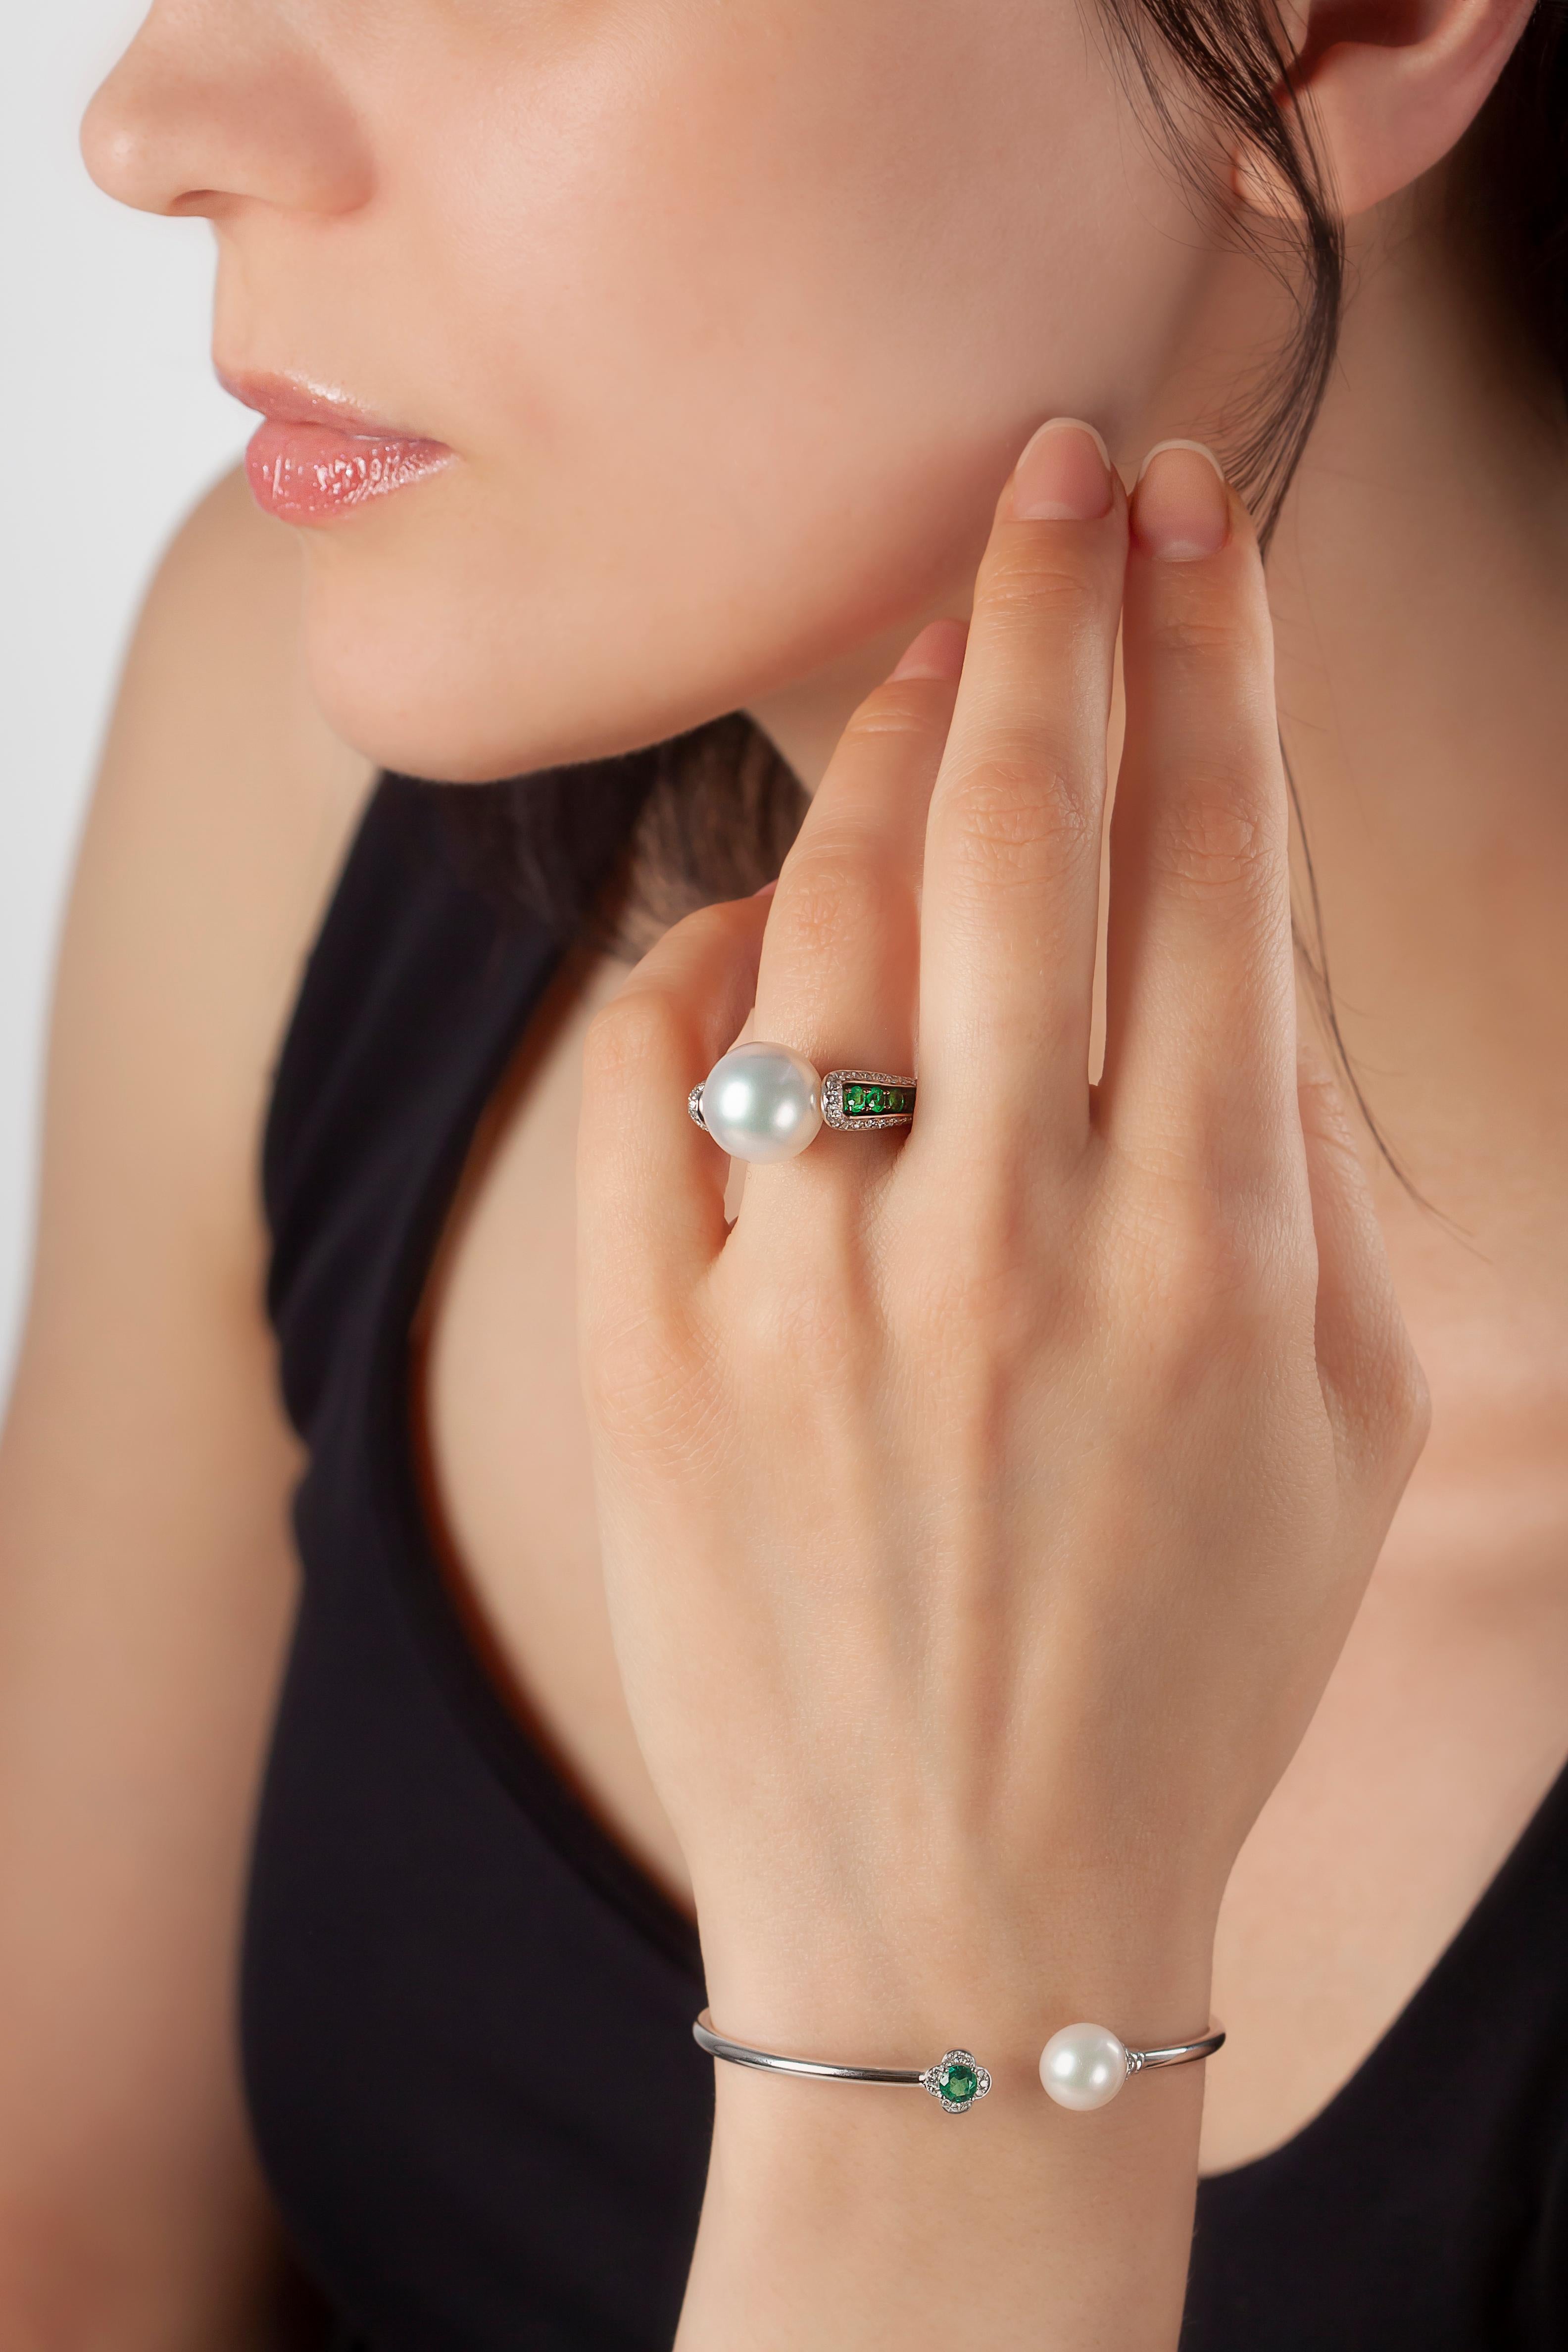 This striking ring by Yoko London features a radiant 12.5mm South Sea pearl which is perfectly offset by the emerald and diamond shoulders. Designed and hand-finished in our London atelier, this unique ring will make a statement whenever it is worn